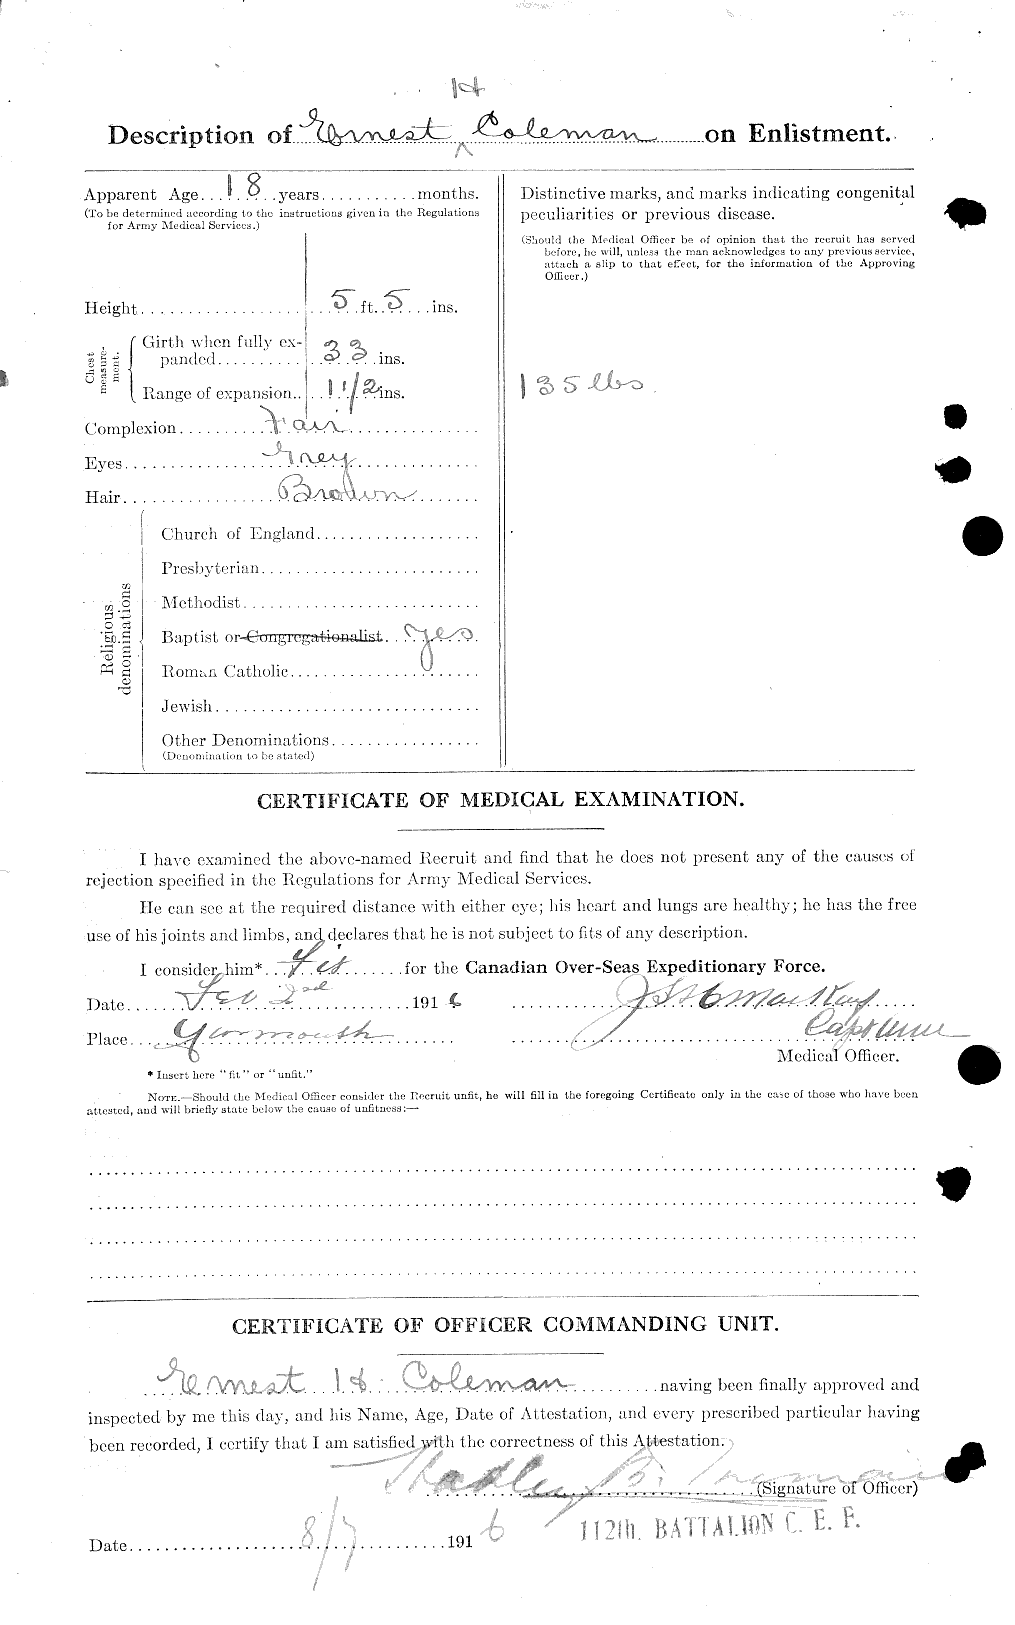 Personnel Records of the First World War - CEF 028119b